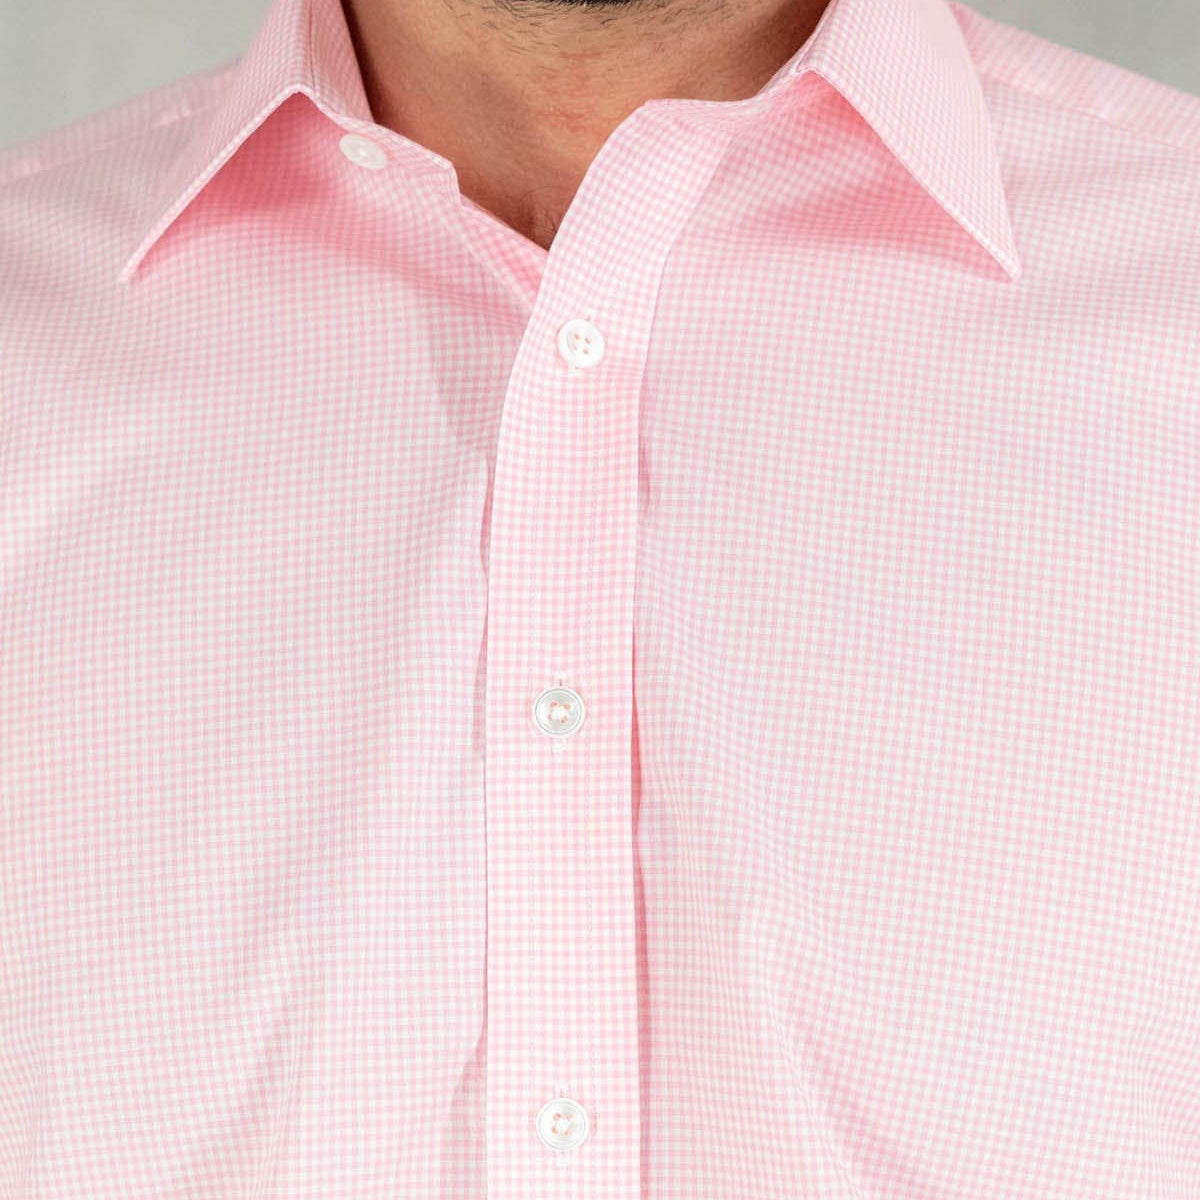 Classic Fit, Classic Collar, Two Button Cuff Shirt In Pink Gingham Check